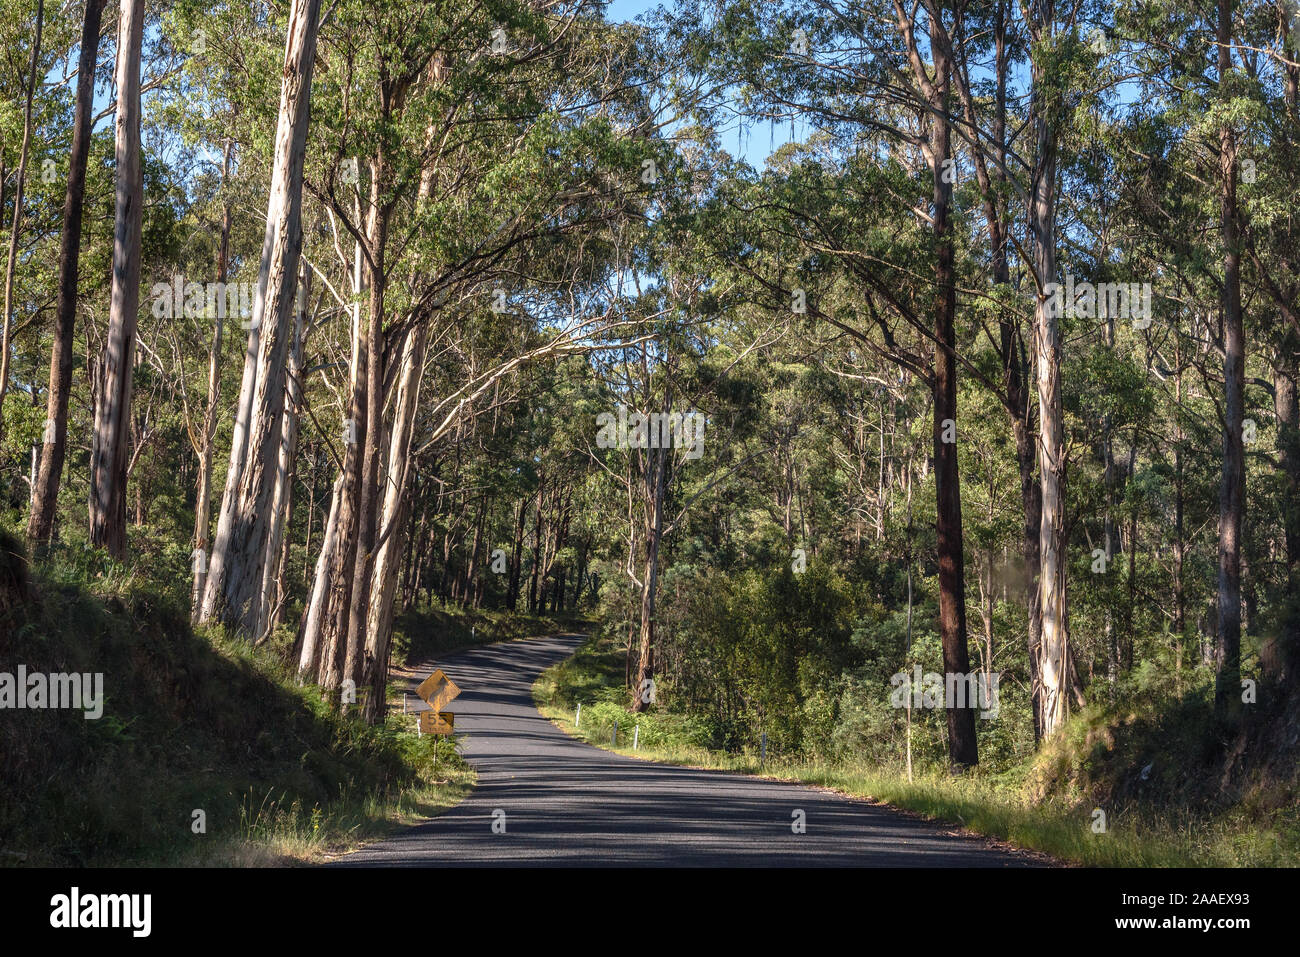 The Alpine Way winding through the Snowy Mountains of Australia in the summer Stock Photo